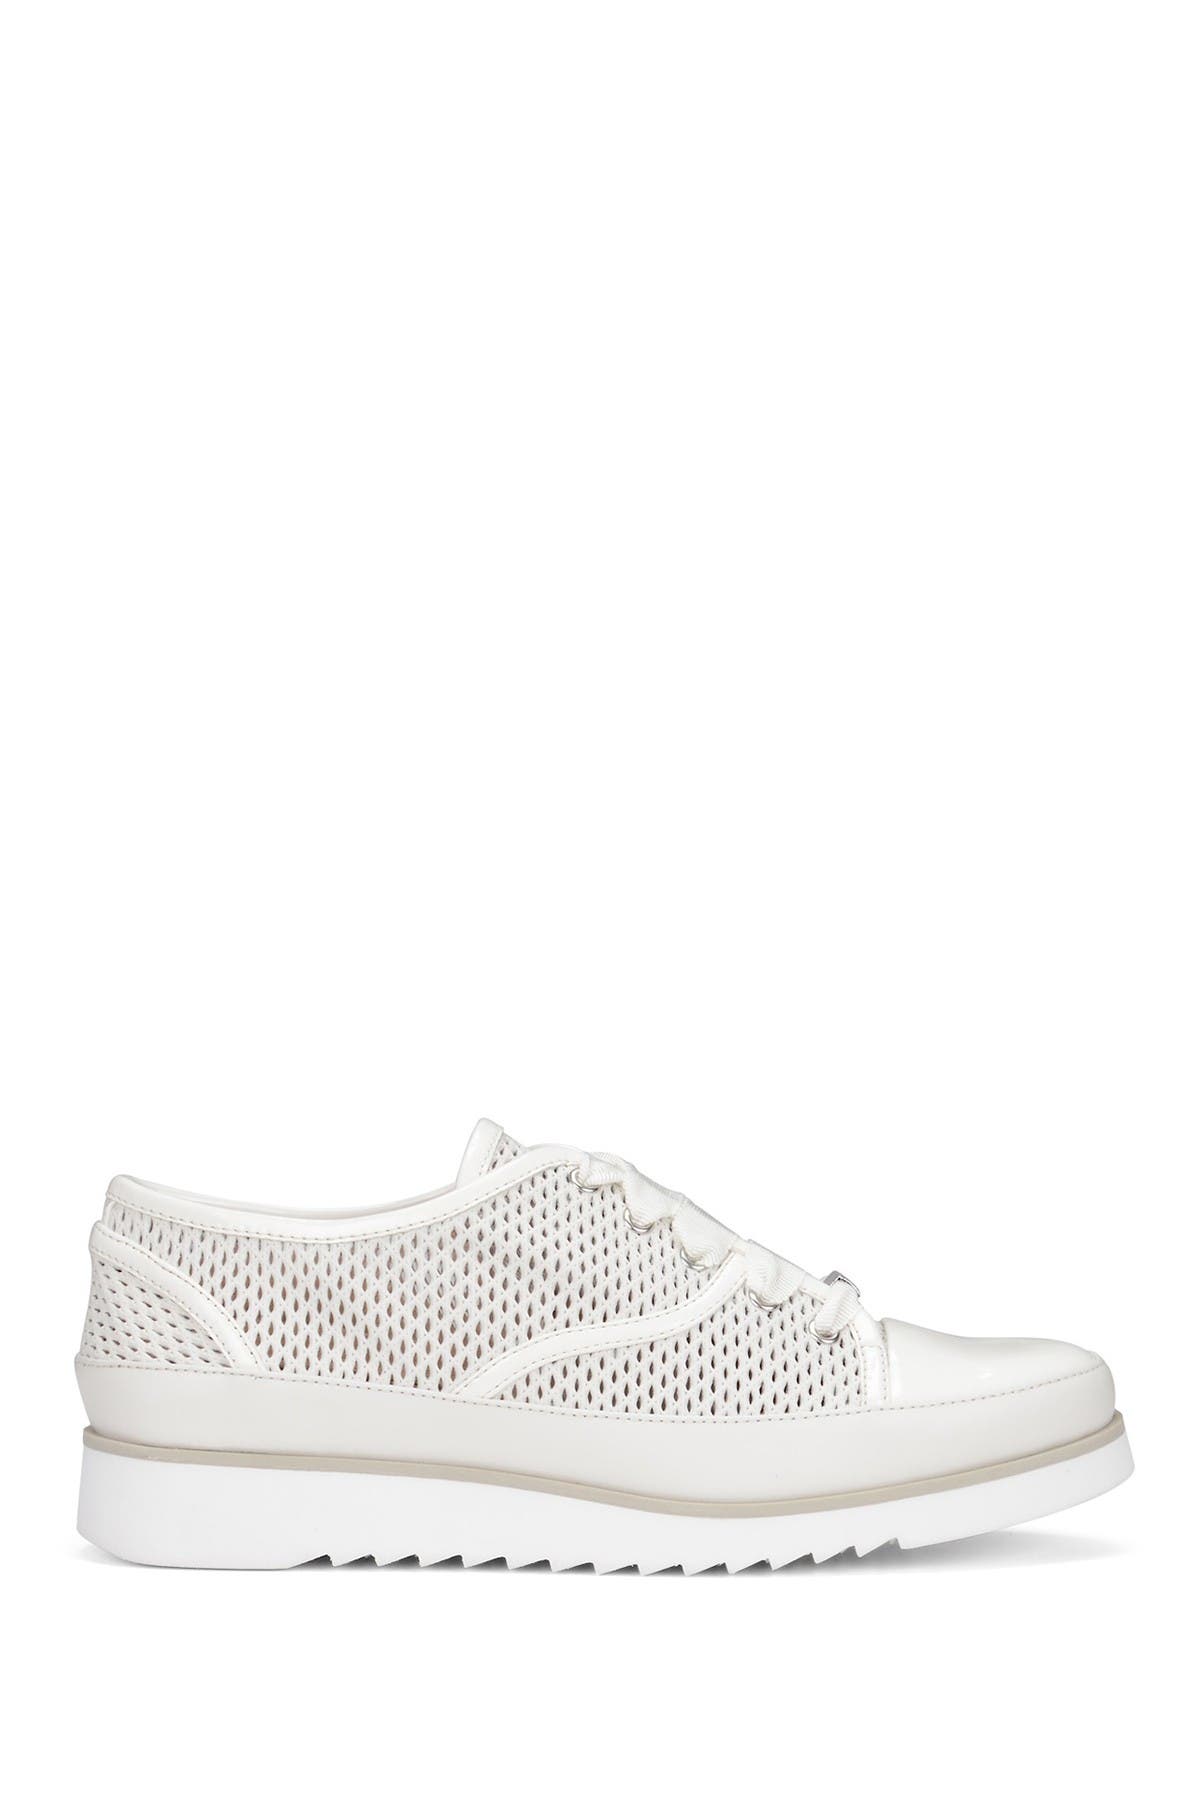 Donald Pliner Flipp Perforated Leather Sneaker In Bone Leather